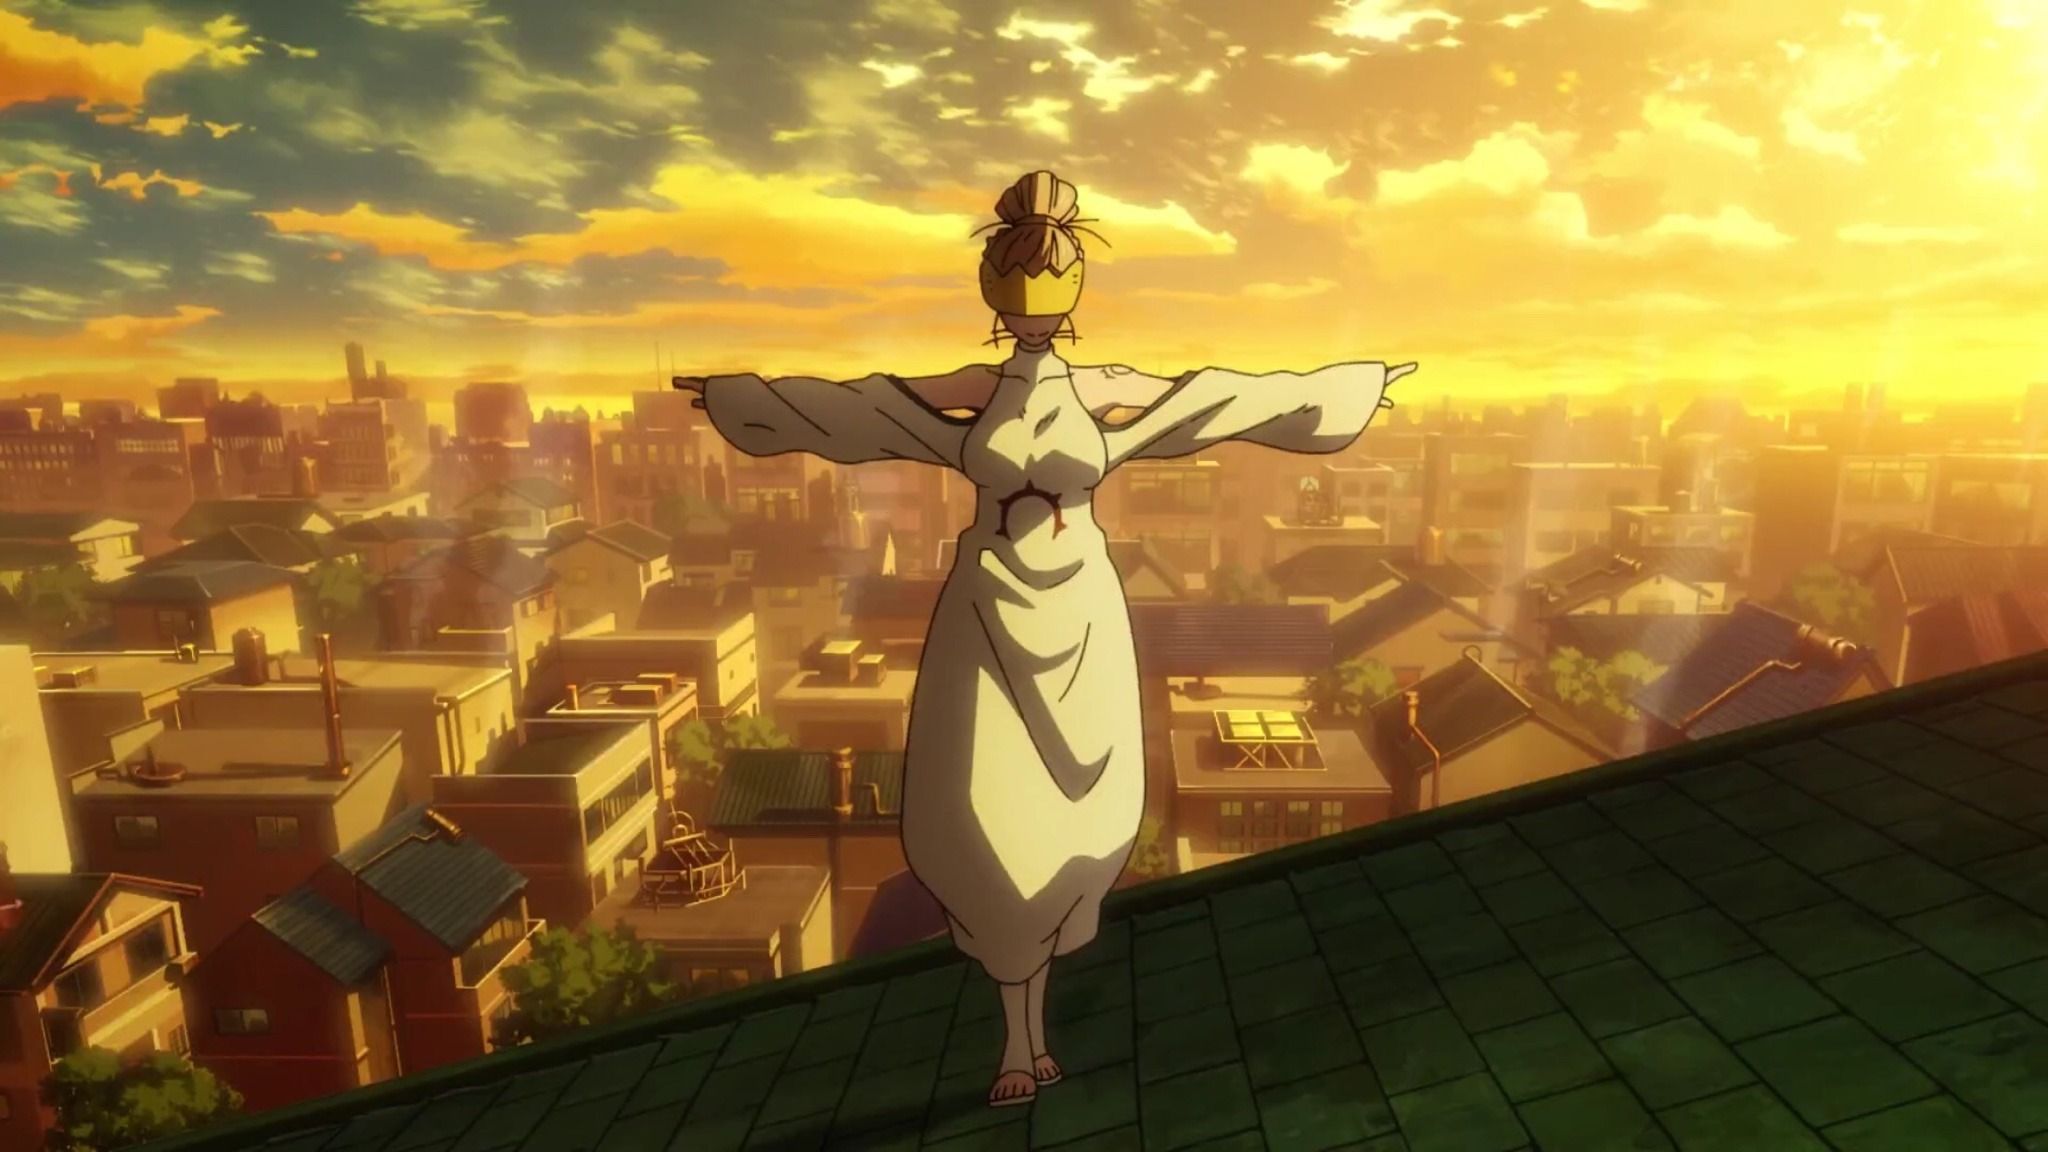 Haumea Using The T Pose To Intimidate Her Adversar